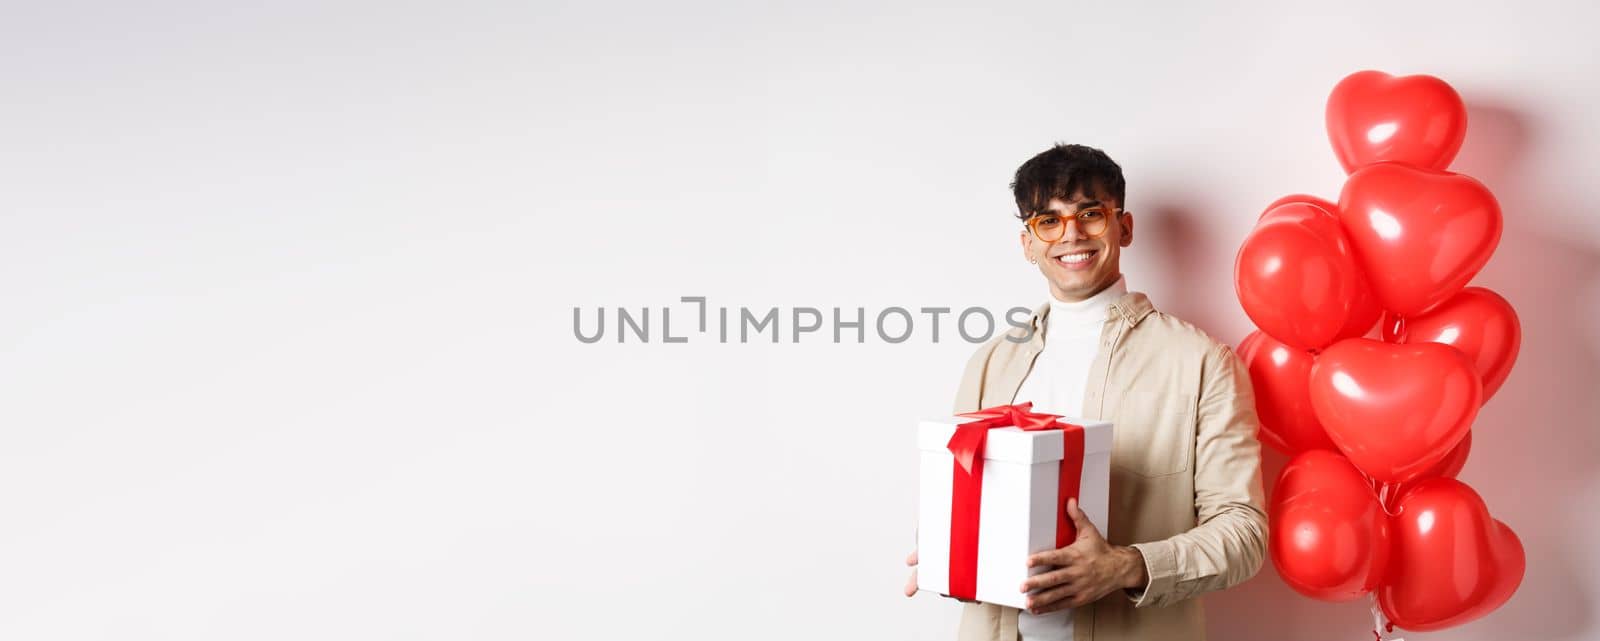 Valentines day and romance concept. Man in love prepare surprise gift for lover, holding present in box and standing near red hearts gesture, white background.